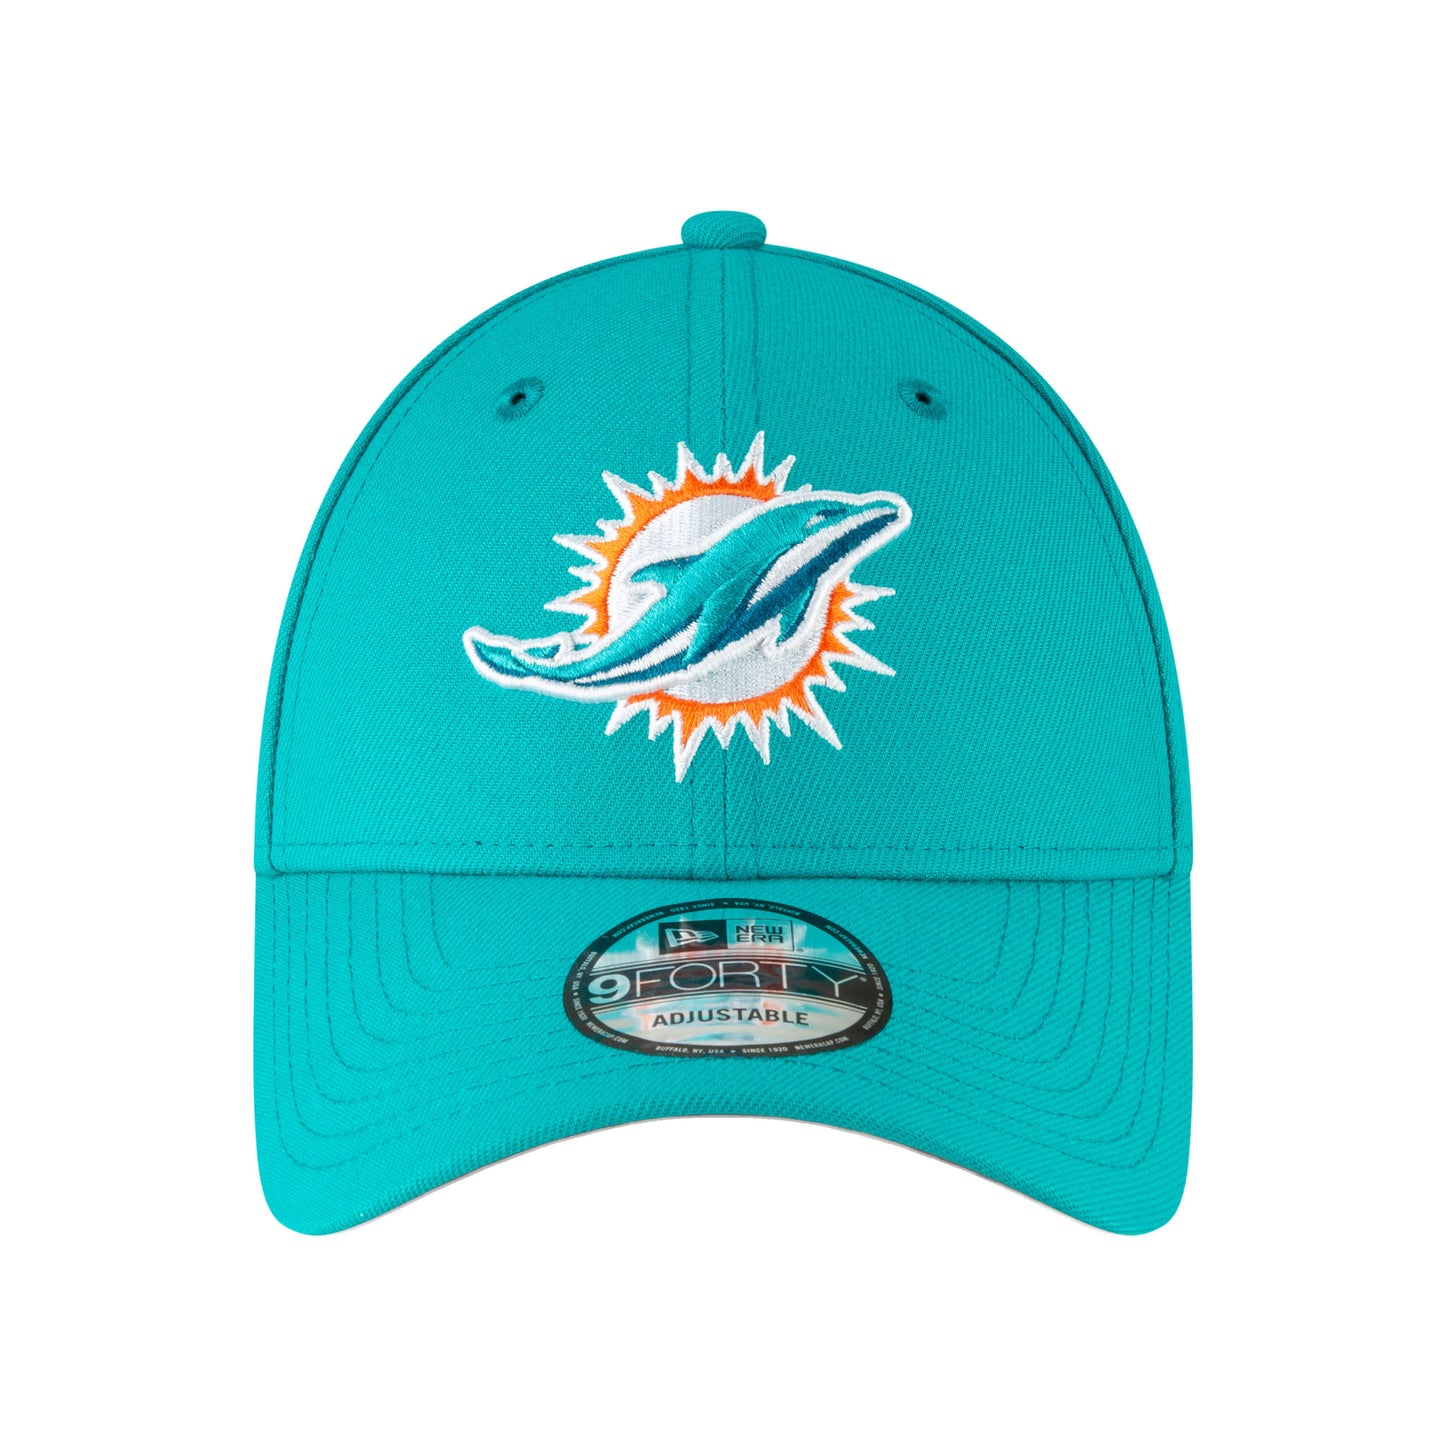 THE LEAGUE Miami Dolphins 9FORTY New Era Cap